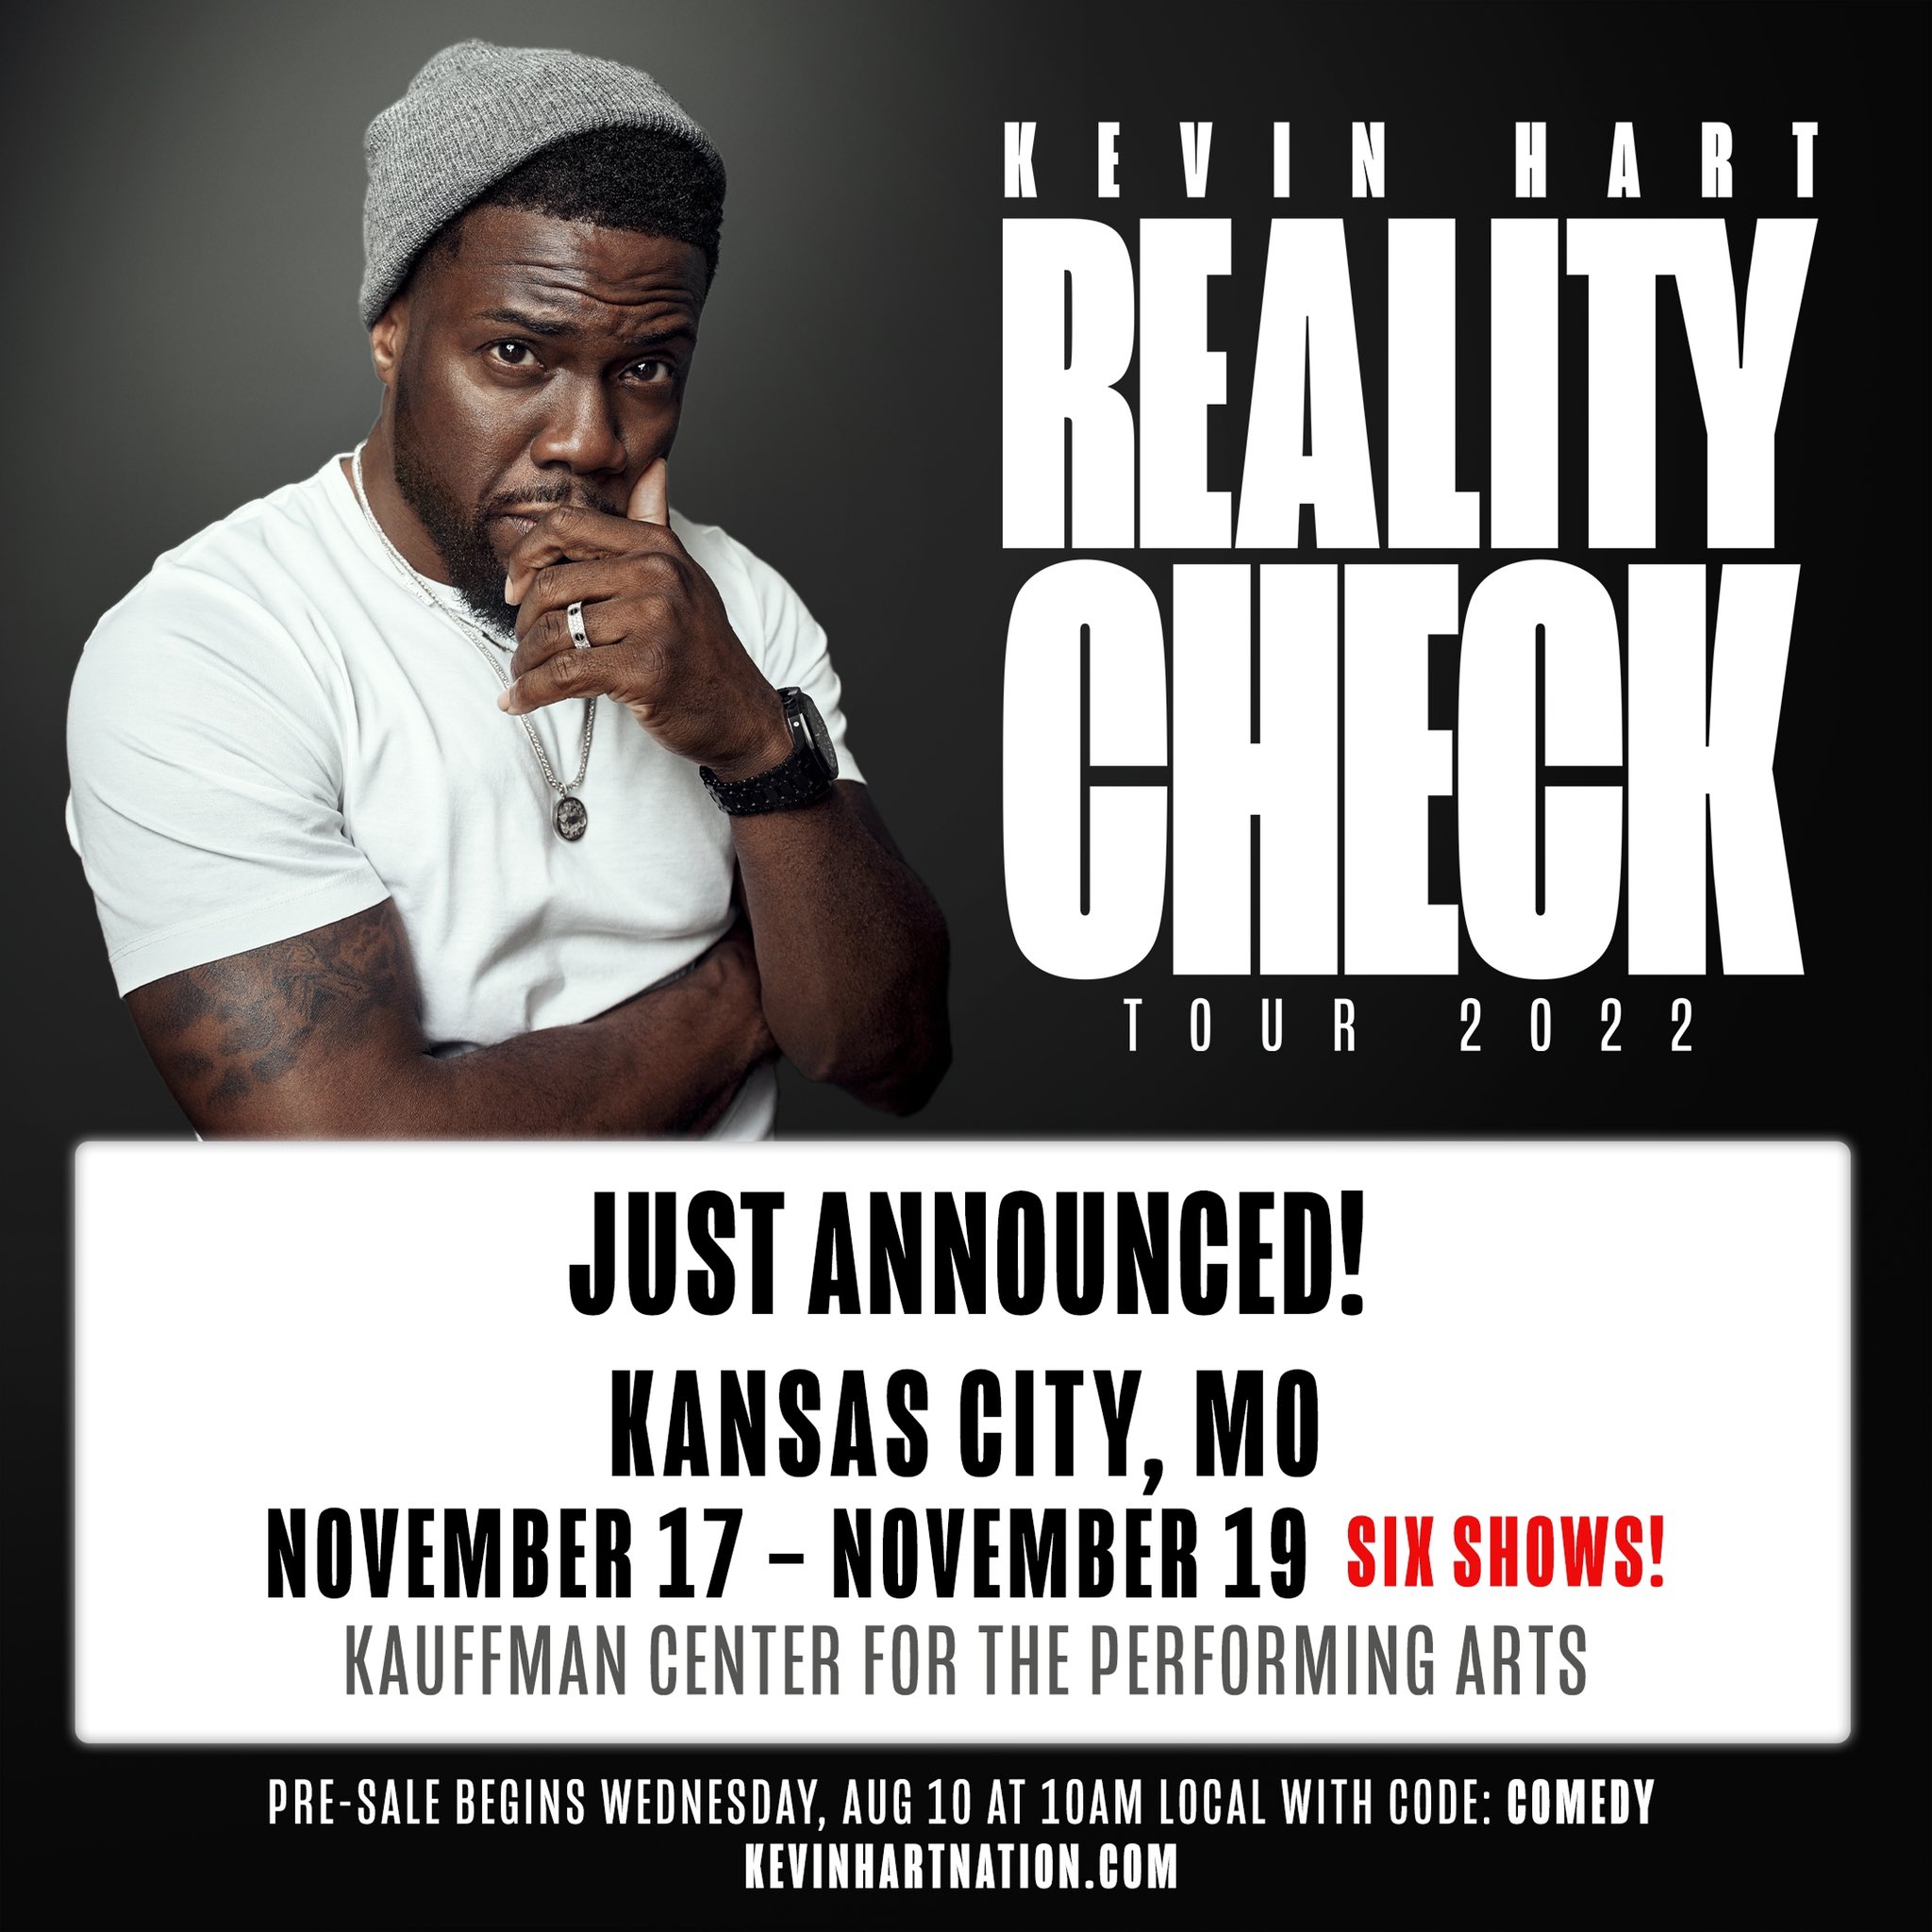 Kevin Hart on Twitter "JUST ANNOUNCED! RealityCheck tour is coming to